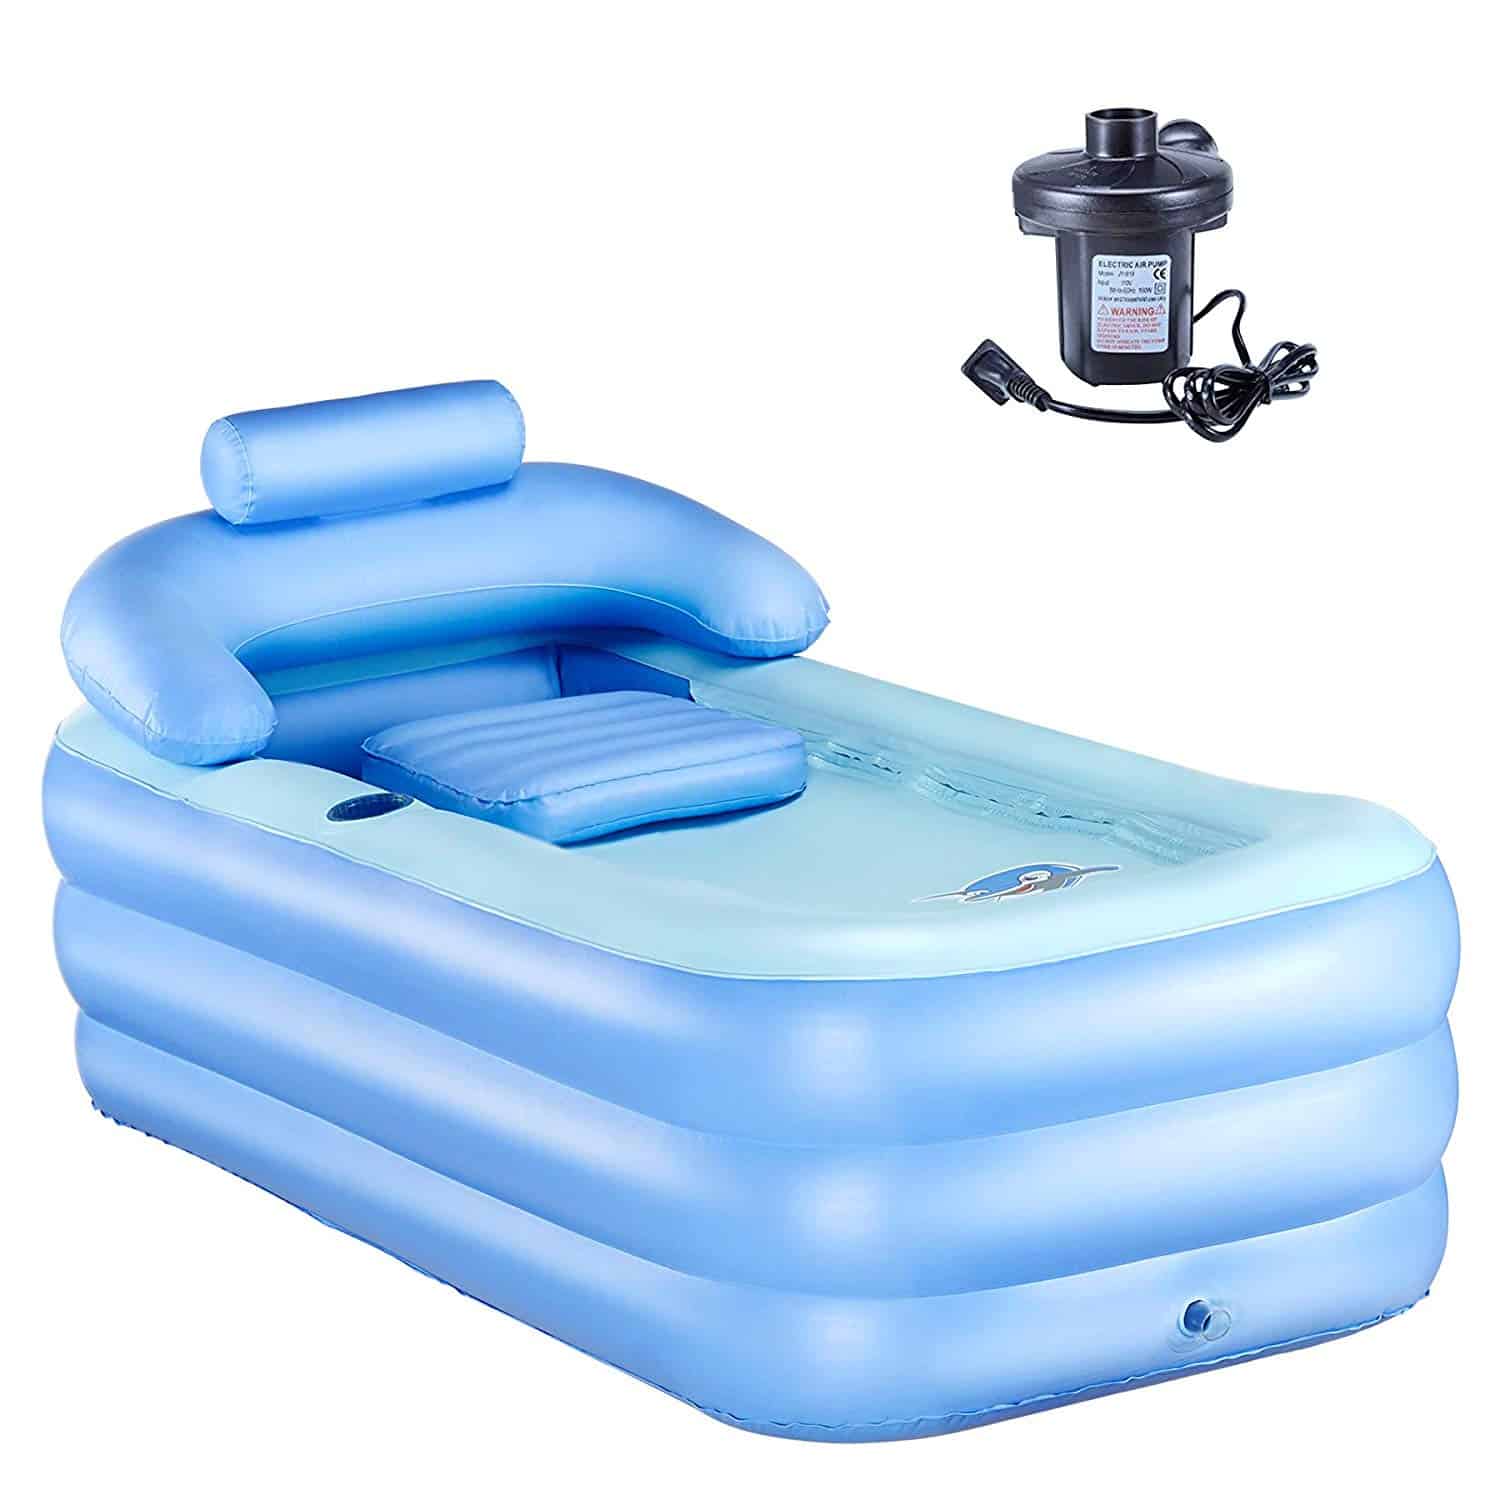 Top 10 Best Portable Hot Tubs in 2021 Reviews & Buying Guide